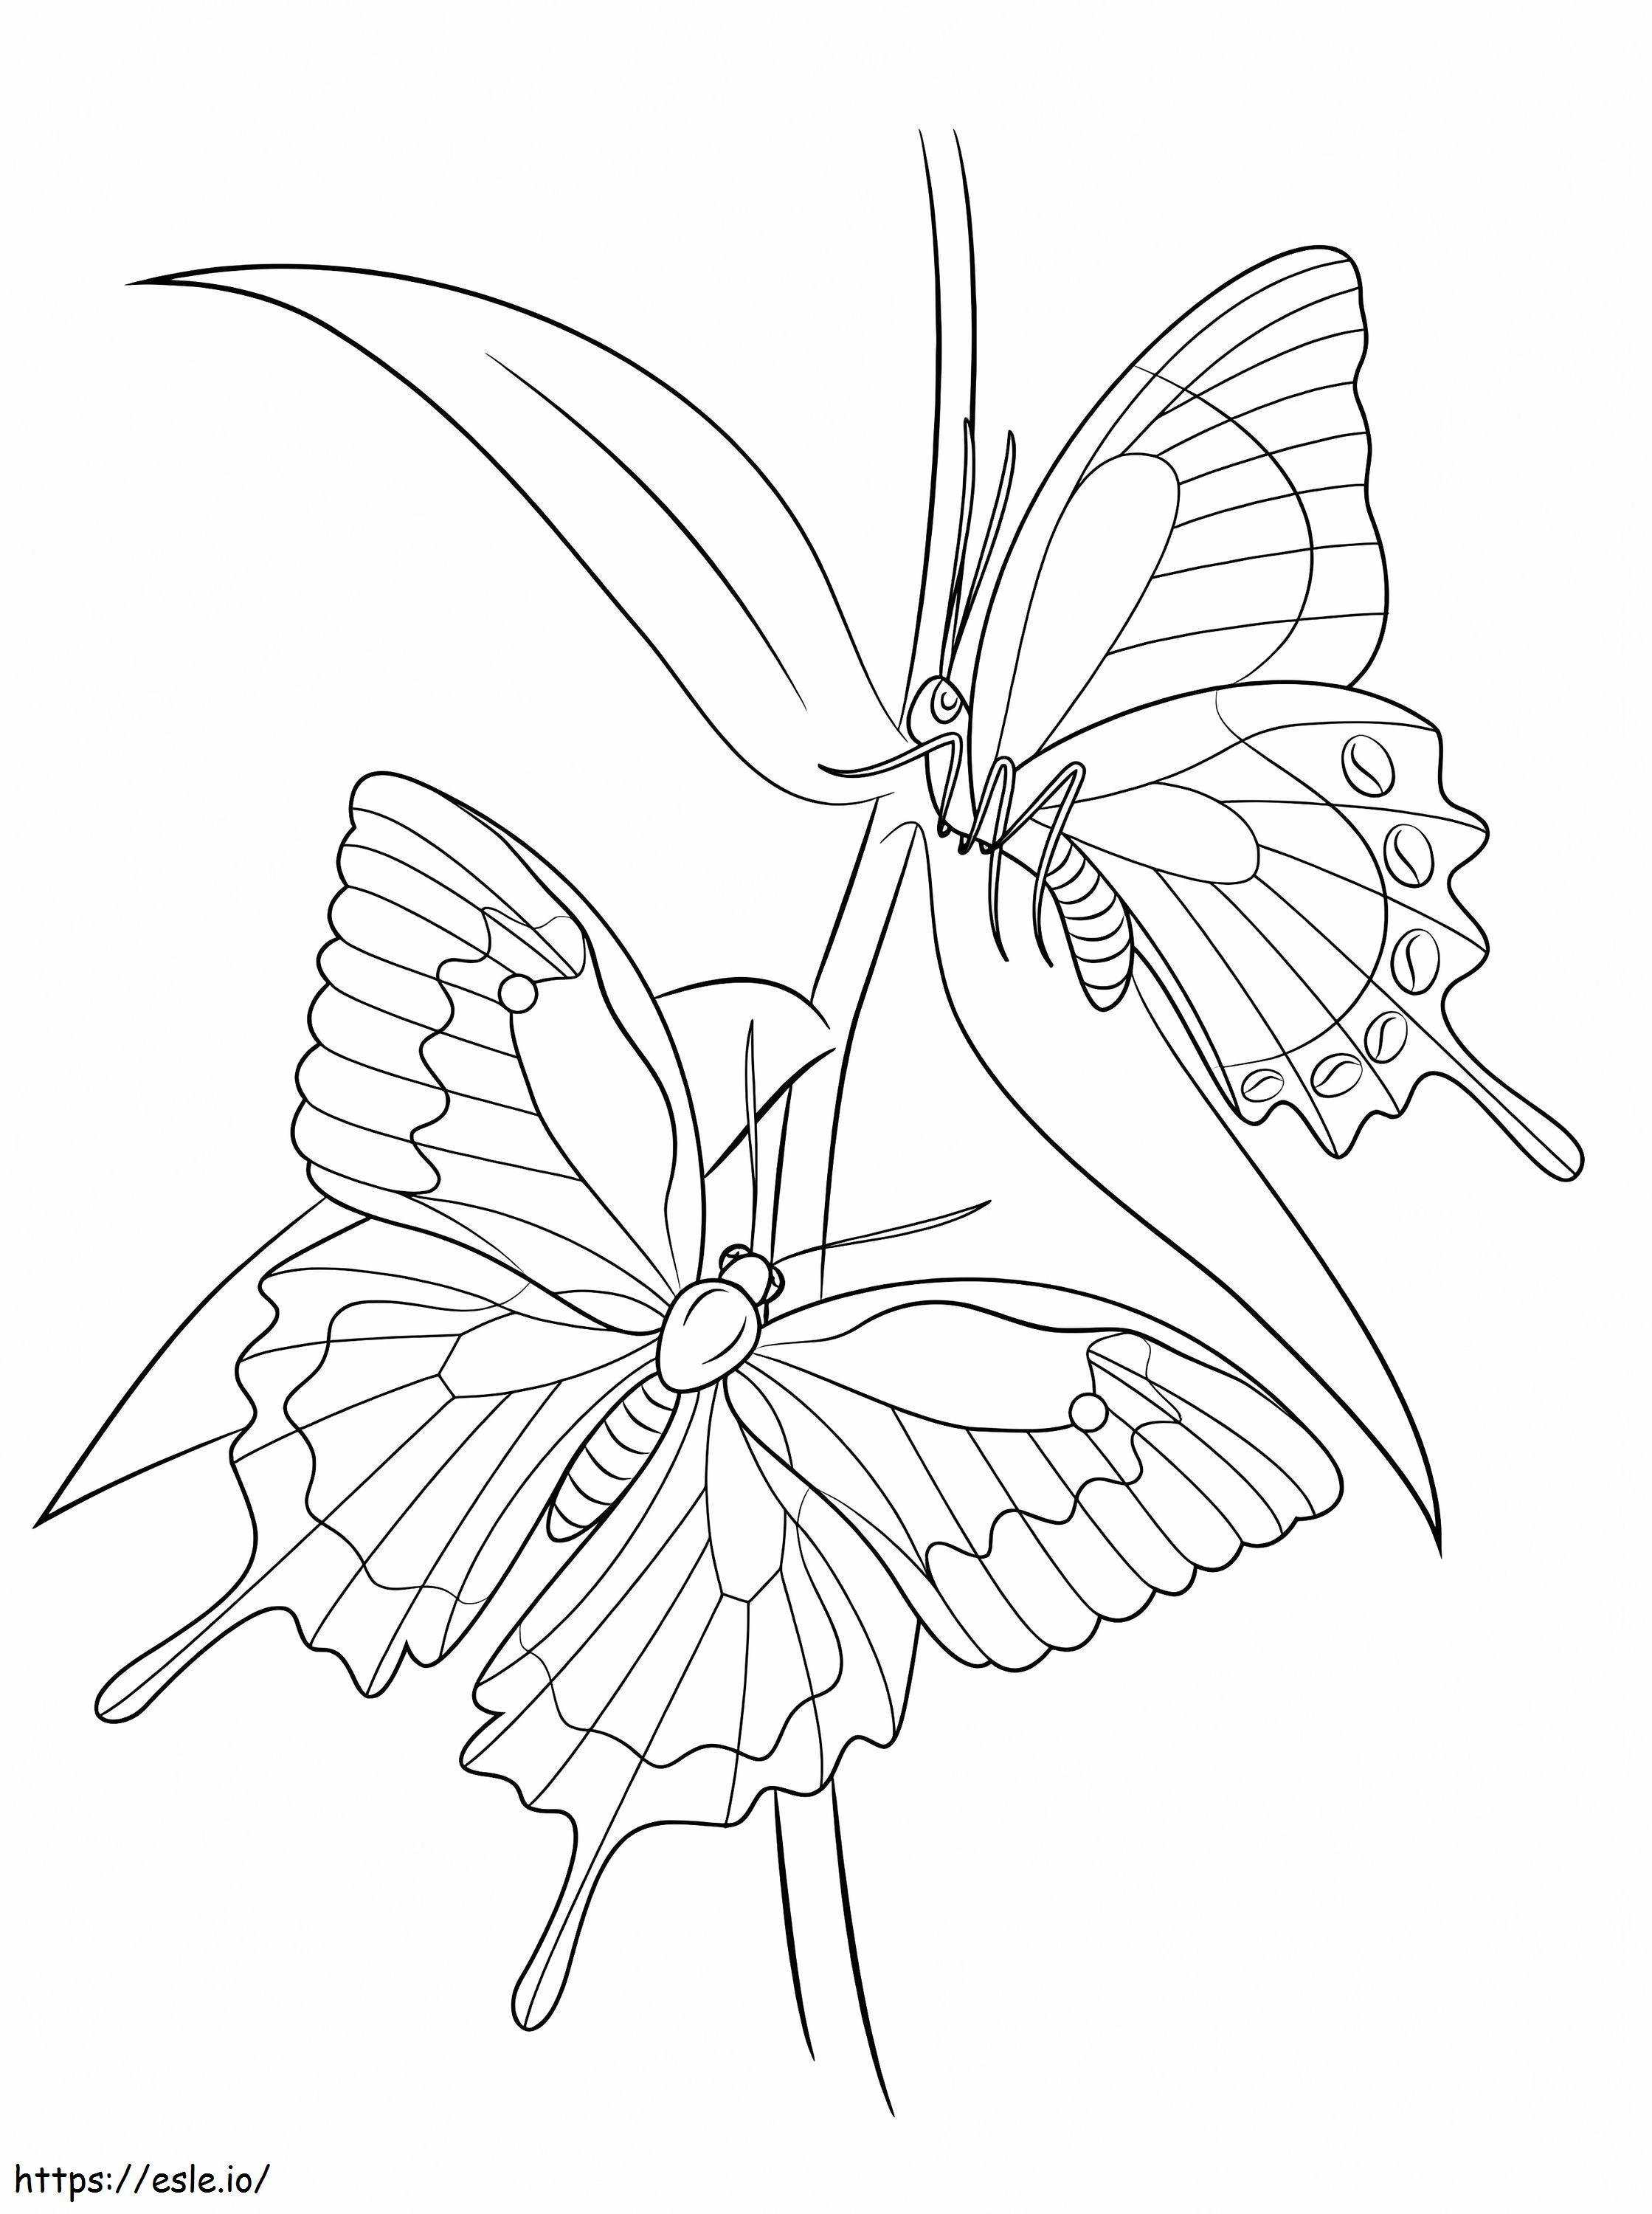 Ulysses Butterflies coloring page